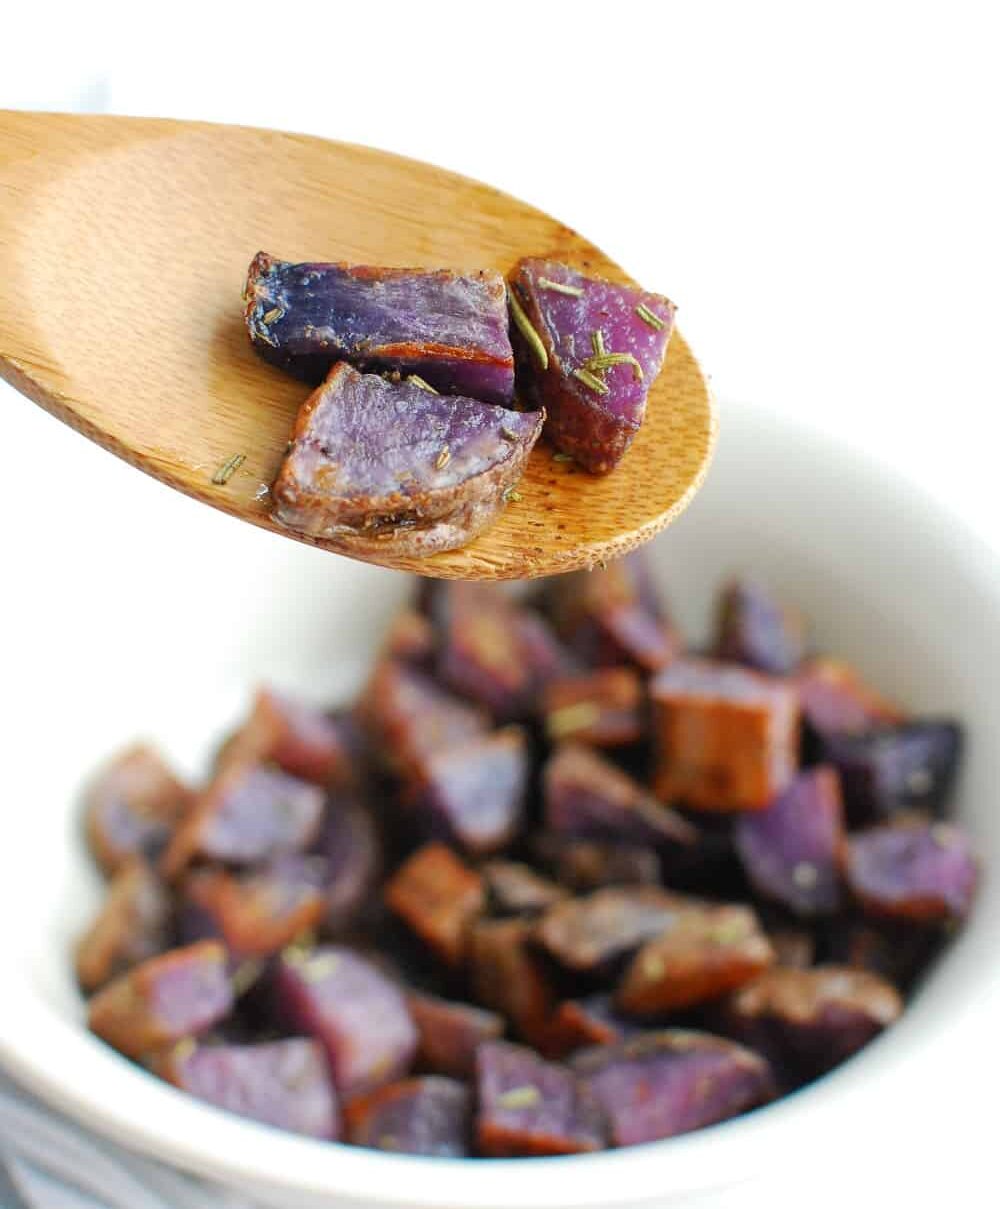 A wooden spoon with three roasted purple potatoes on it.